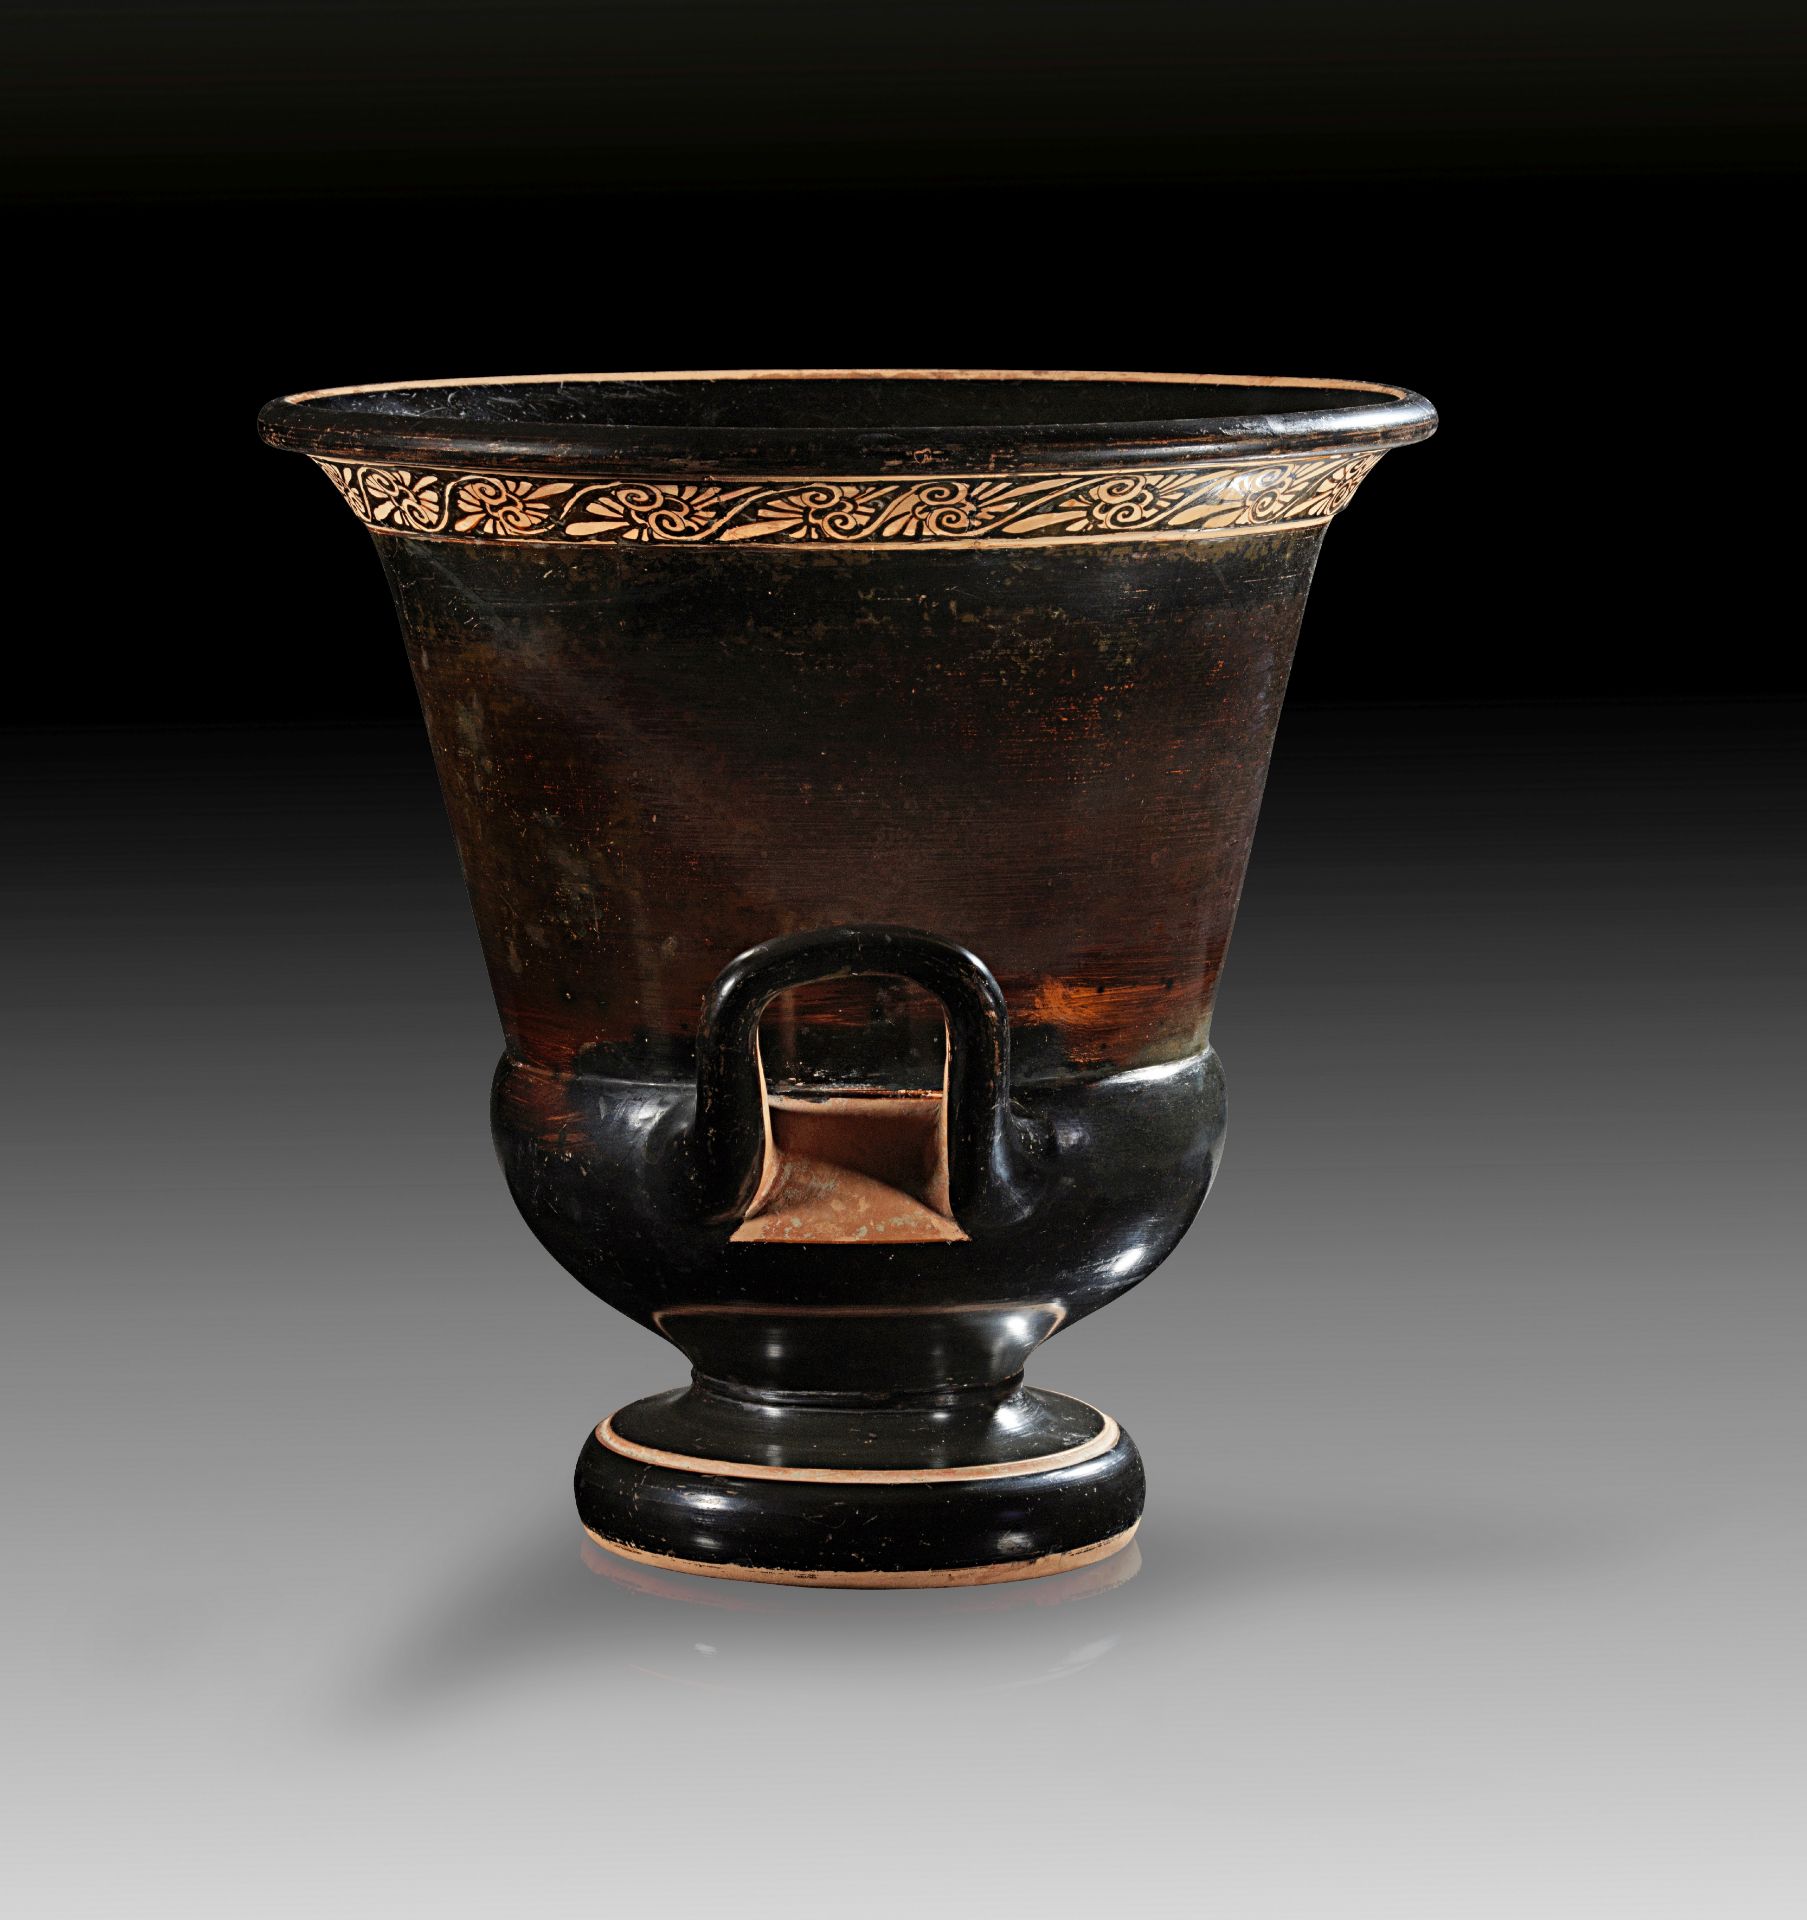 Attic calyx krater. - Image 3 of 3